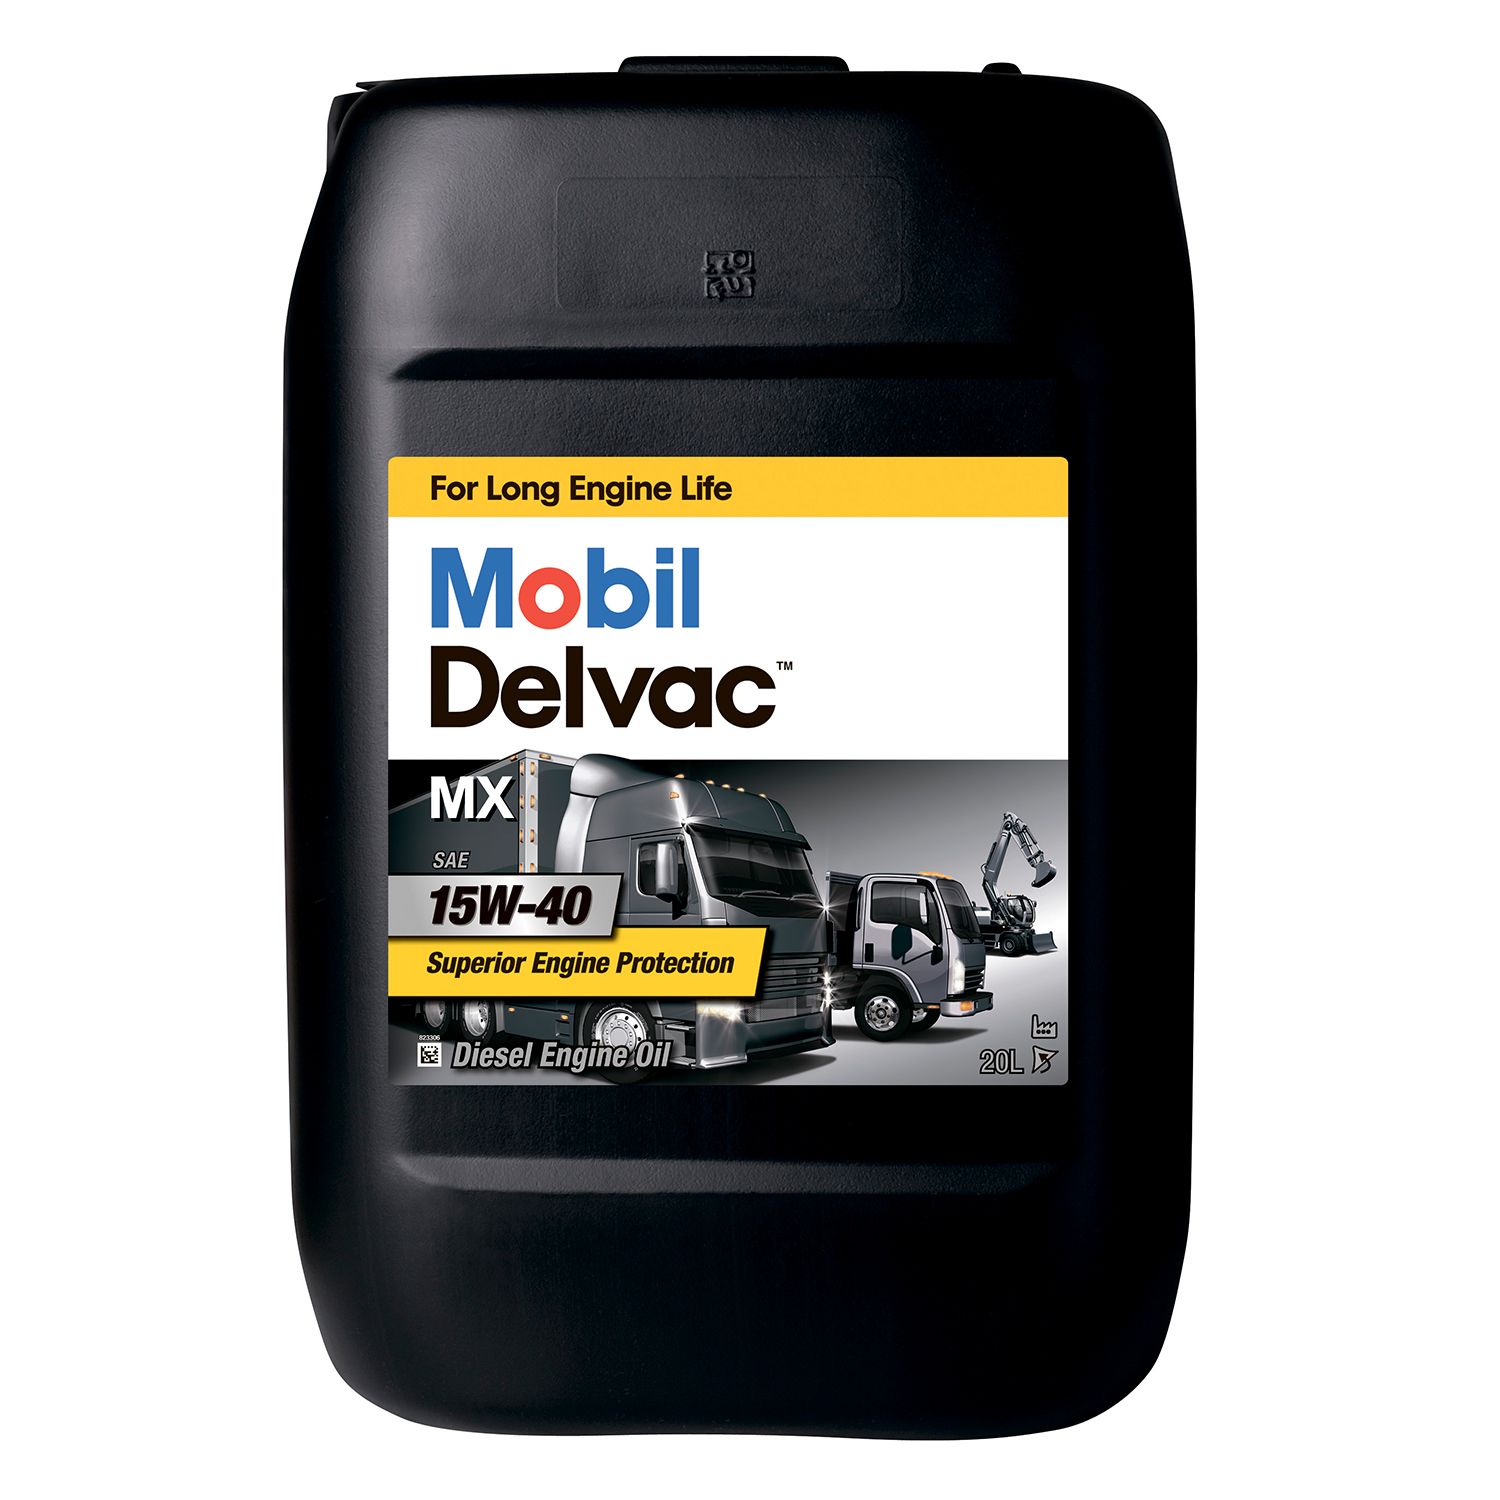 Масло mobil delvac mx. Масло моторное mobil Delvac XHP Extra 10w 40 синтетическое 20 л 152712. Mobil масло Delvac XHP Extra 10w40 20л. Масло mobil Delvac MX 15w40 20л. Mobil Delvac XHP Ultra 5w-30 20л.